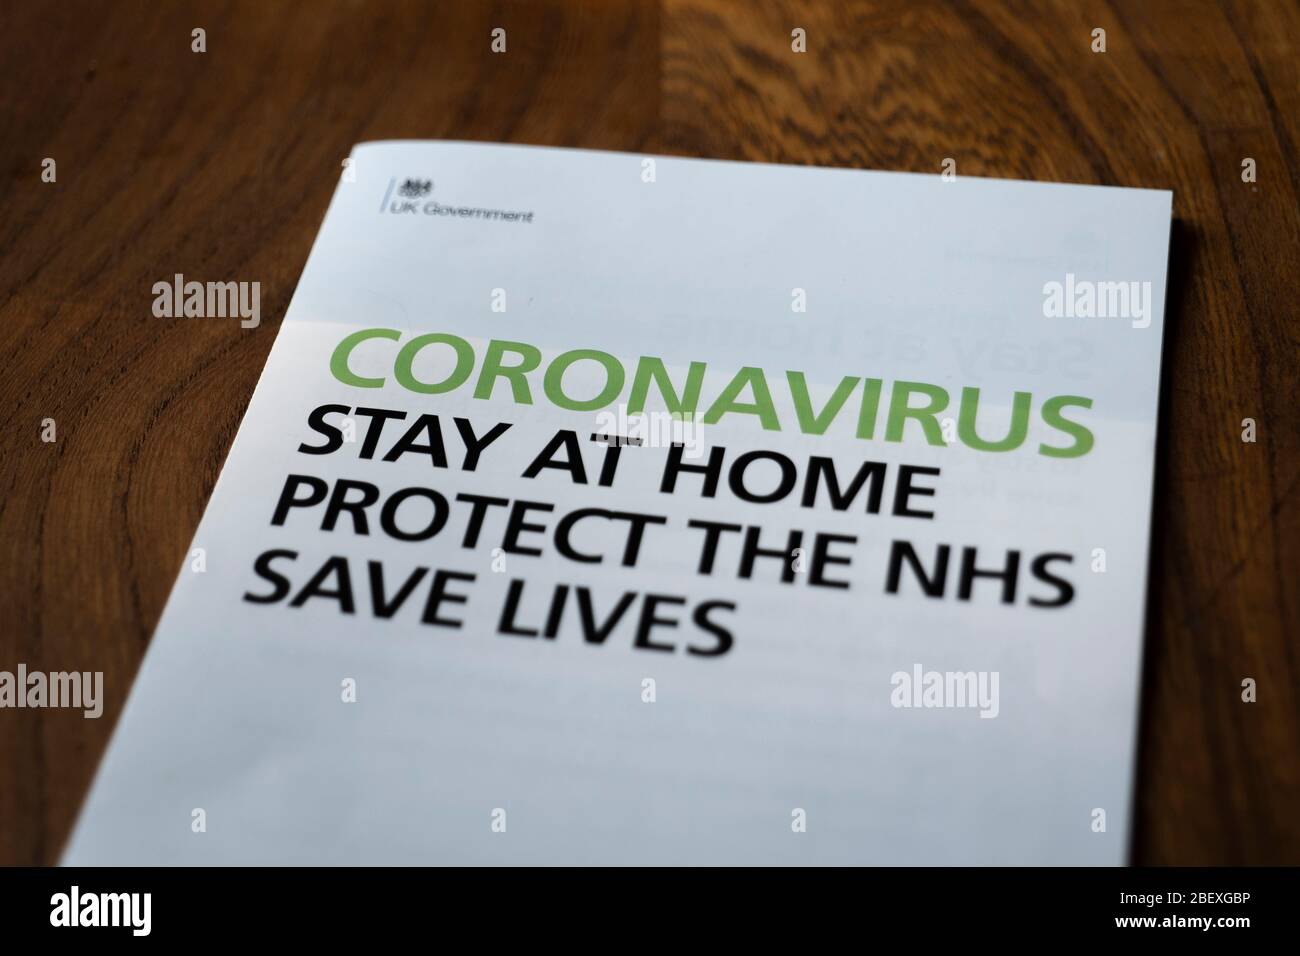 Coronavirus UK Government letter outlining details about 'Staying at Home, Protect the NHS & Save Lives' received on the 11th April 2020. Stock Photo